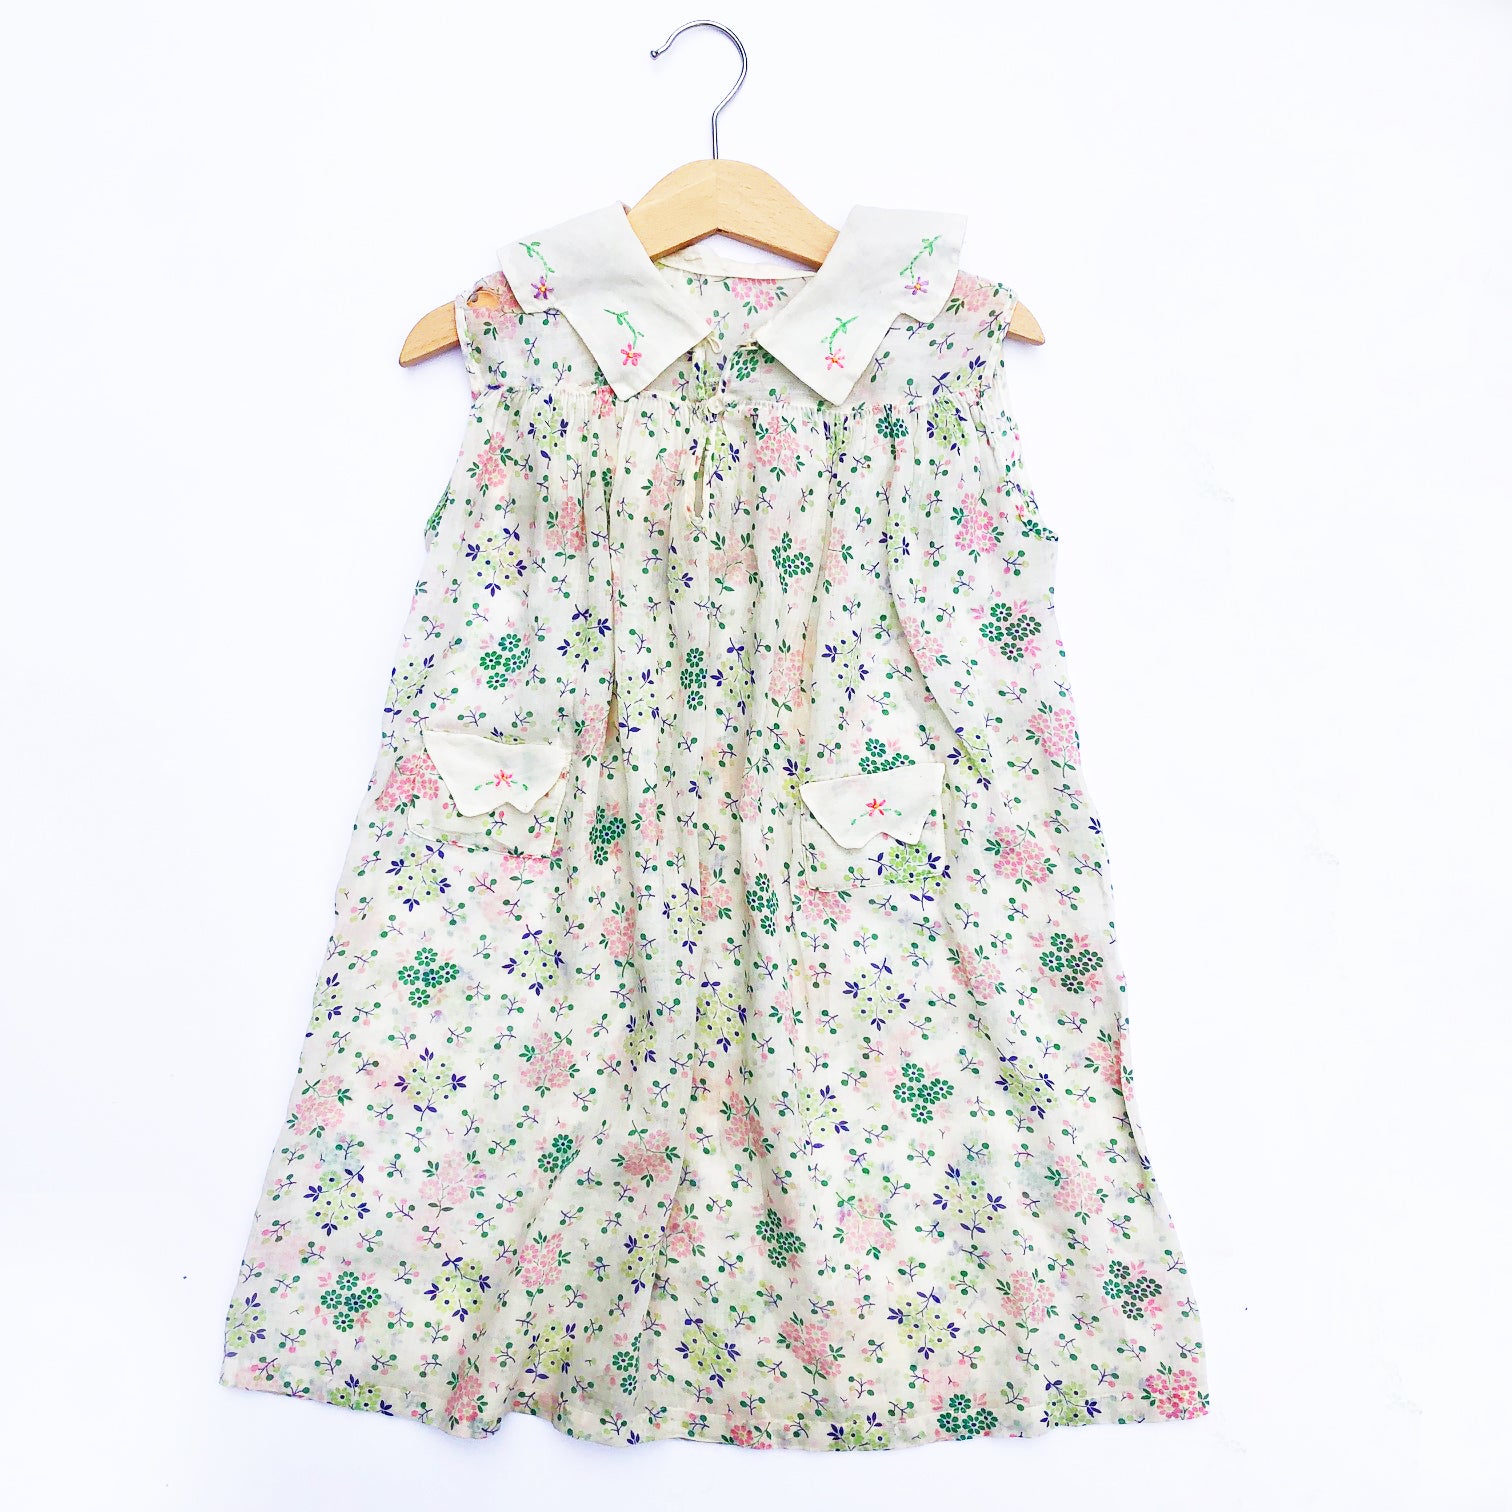 Pretty 40's Vintage Embroidered Print Dress Size 3-4